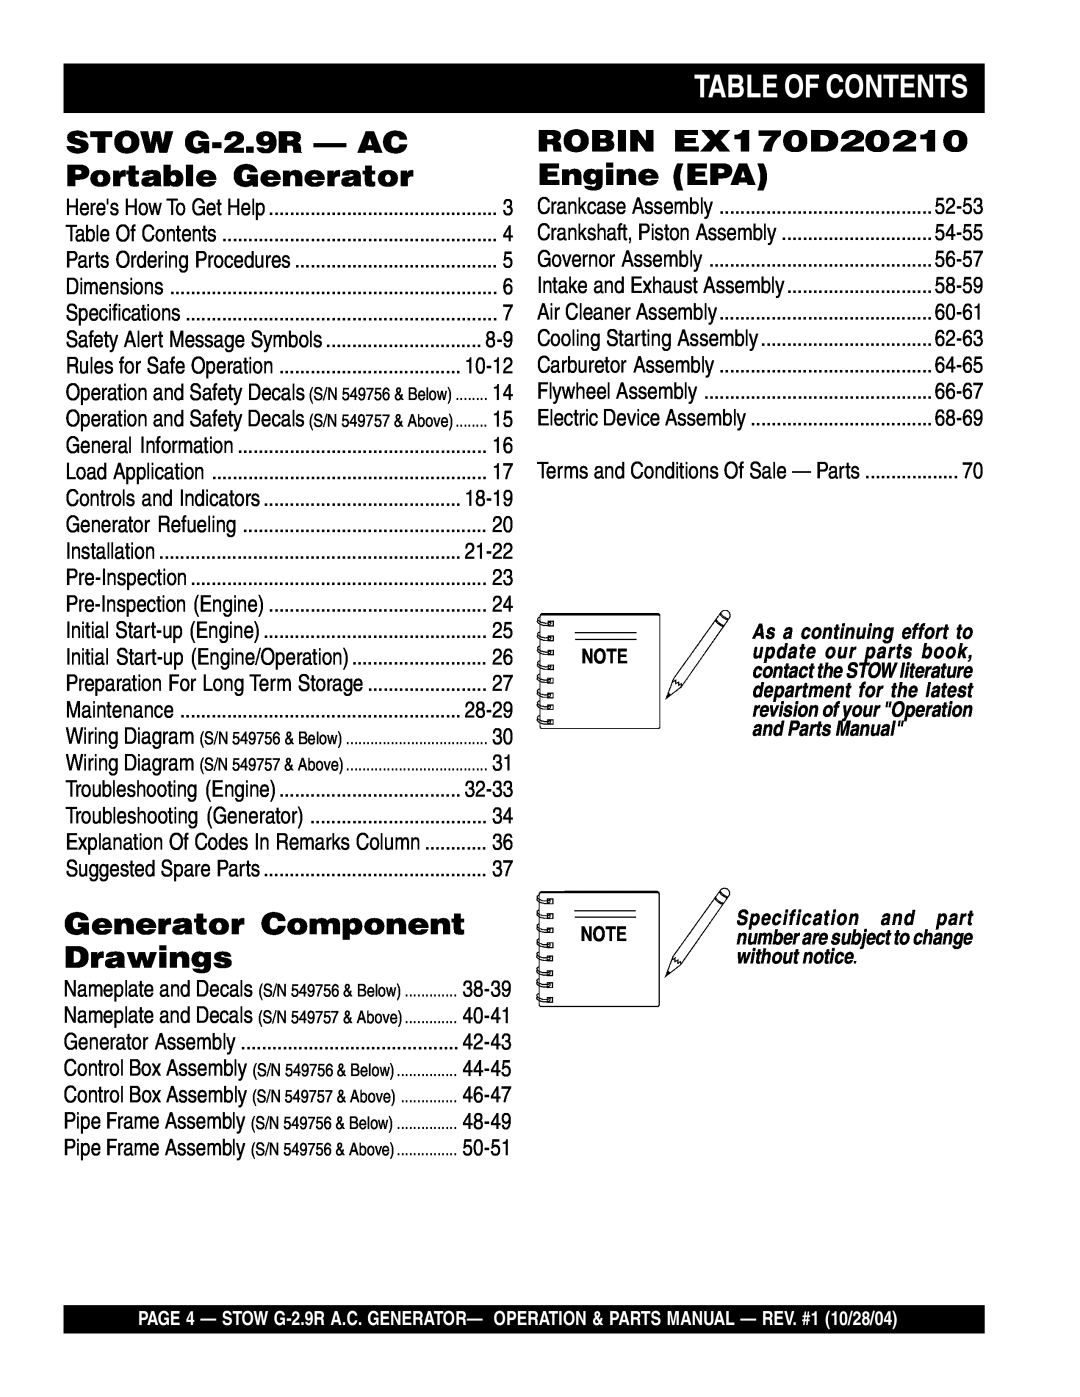 Stow manual Table Of Contents, As a continuing effort to, Specification and part, STOW G-2.9R - AC, Portable Generator 